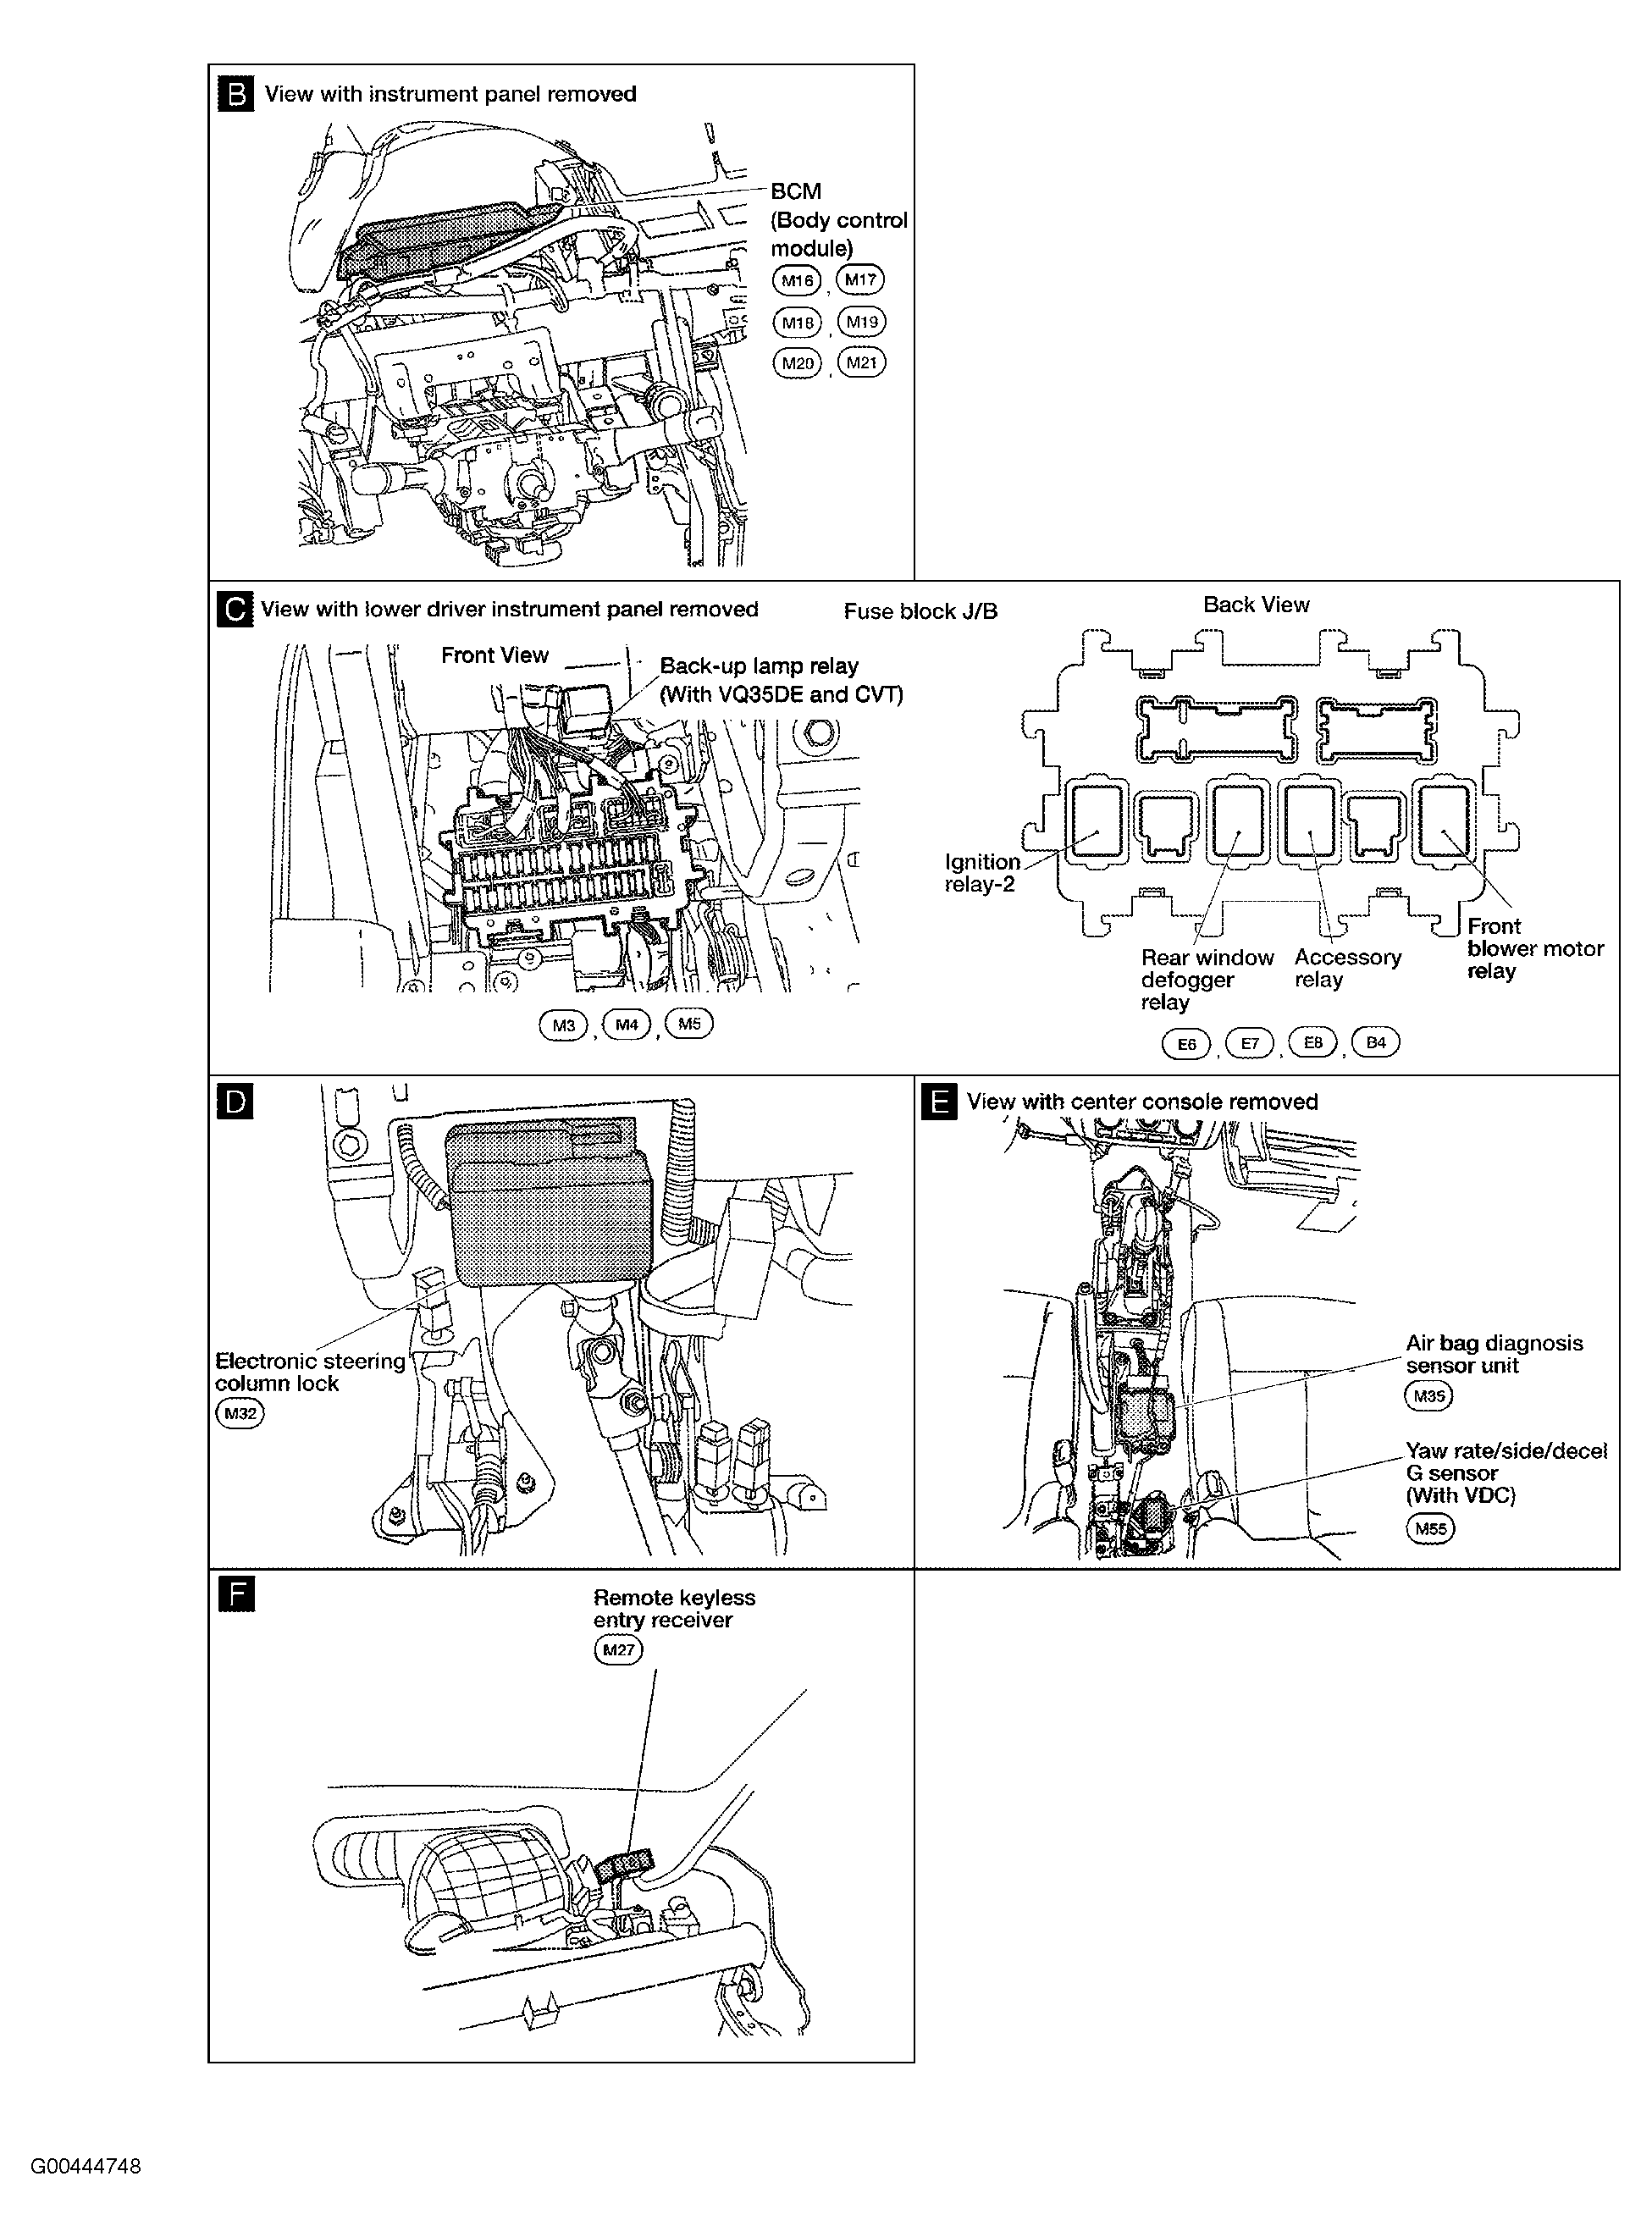 Heater Not Working: the Fan Switch Control for the AC ... 2004 g35x engine diagram 